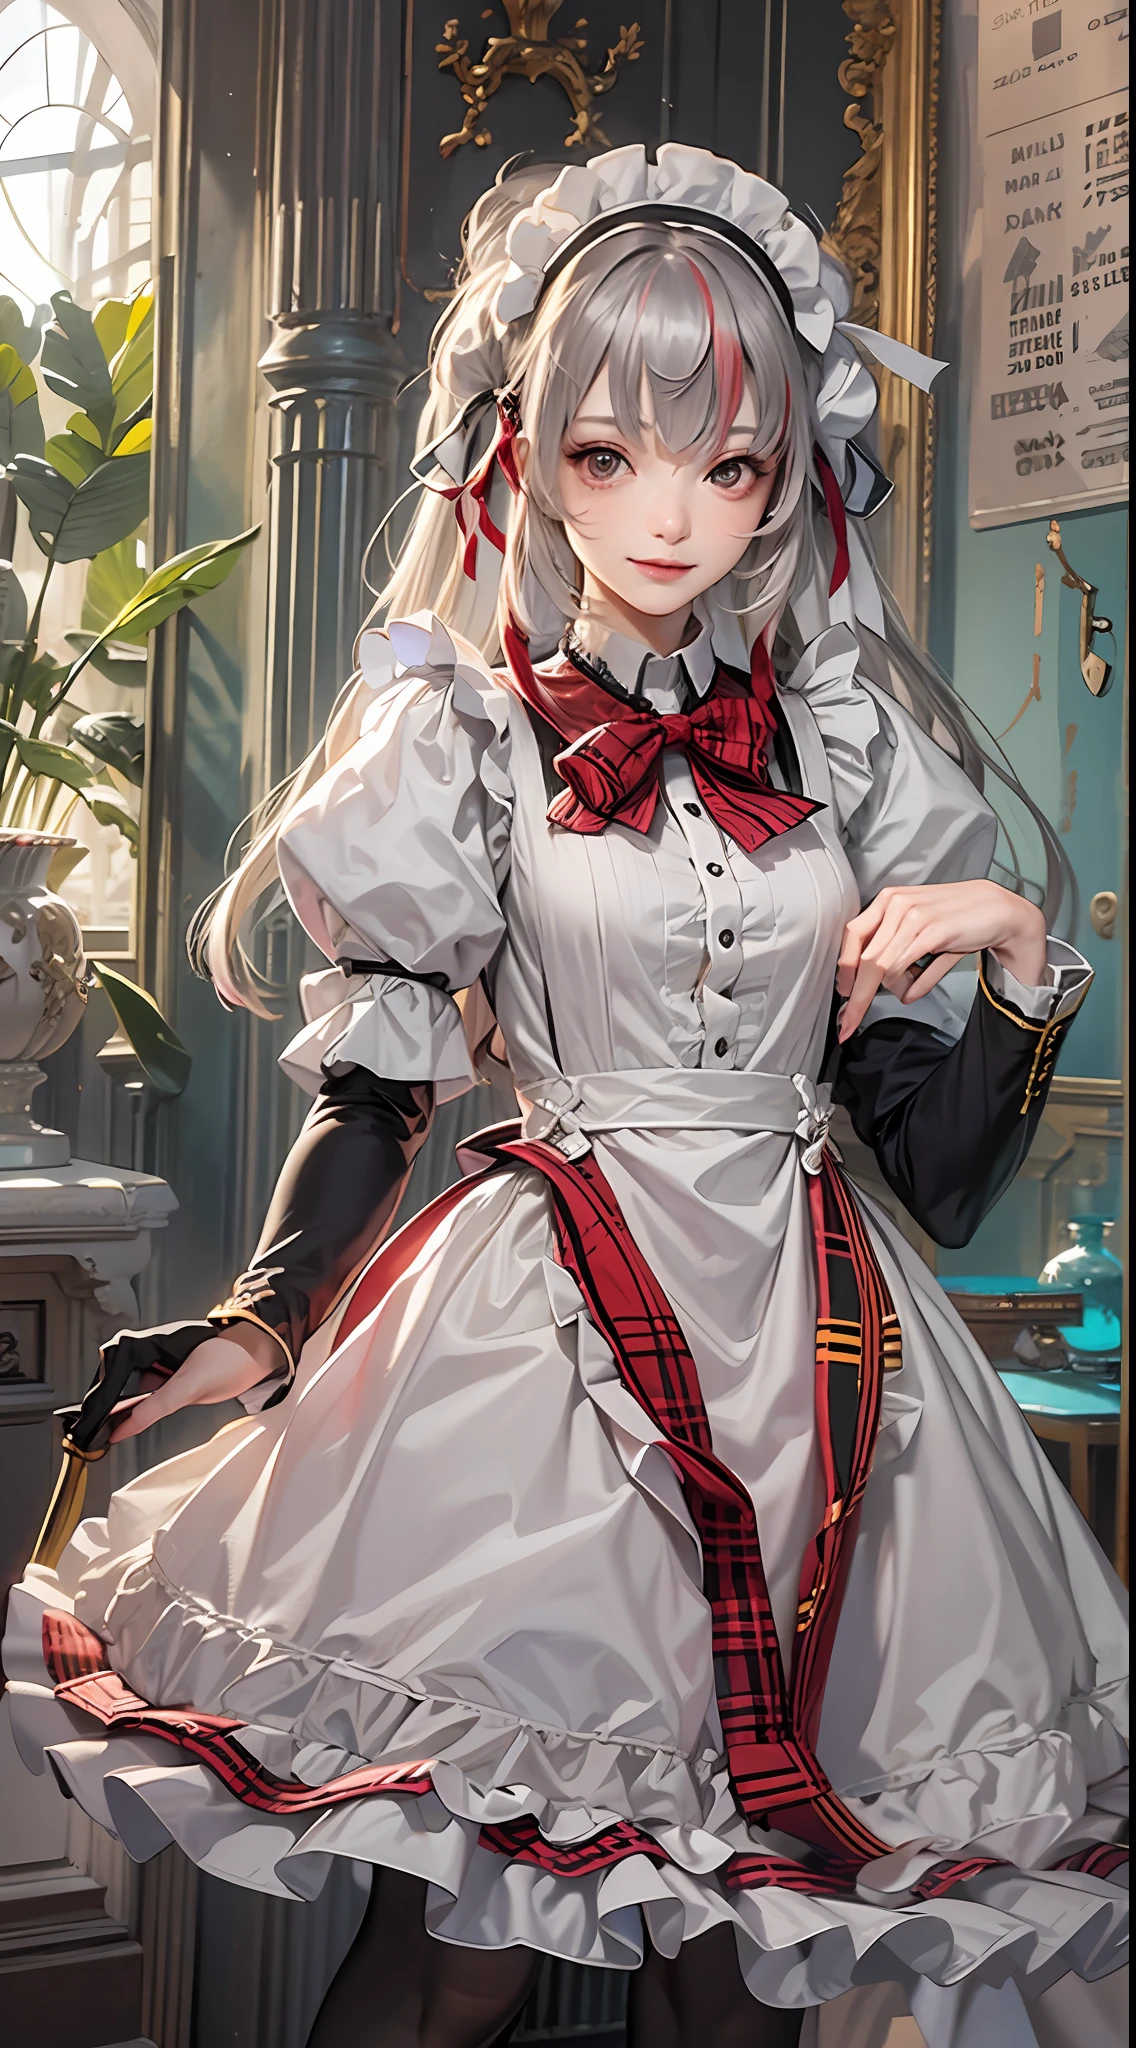 offcial art， Unity 8k Wallpapers， ultra - detailed， Beautiful and beautiful， tmasterpiece， best qualtiy， scientific fiction， （natta：1.2）， （1girll：1.3）， （young：1.1），The picture is clear，a close up of a woman in a dress and stockings, gorgeous maid, Maid outfit， Fighting posture， is shy， ssmile， Be red in the face， long whitr hair， whaite hair， Striped hair， red eyes， Hair Bow， Moles under the eyes， （cinmatic lighting：1.2），A person poses for a photo in a maid costume，the maid outfit，laced dress，Luxury theme，realistic dress，The skin details are very detailed，Watch machinery，Beautiful Maid，Feminine beauty，Stunning character art，Ray traching